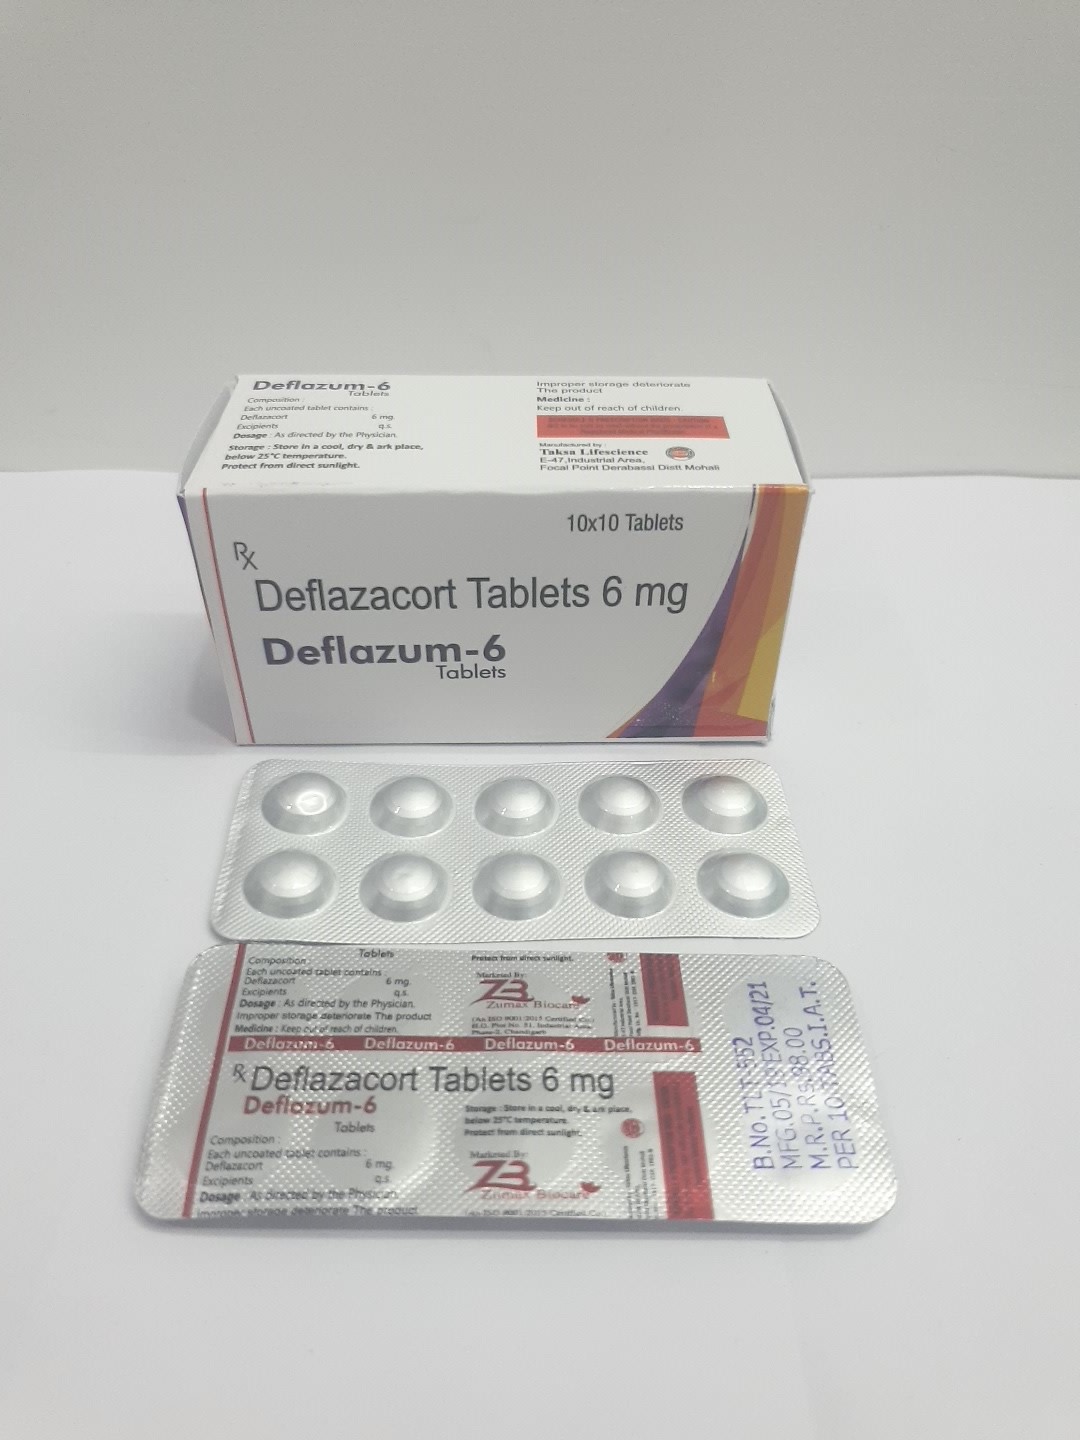 Product Name: Deflazum 6, Compositions of Deflazum 6 are Deflazacort Tablets 6mg - Zumax Biocare